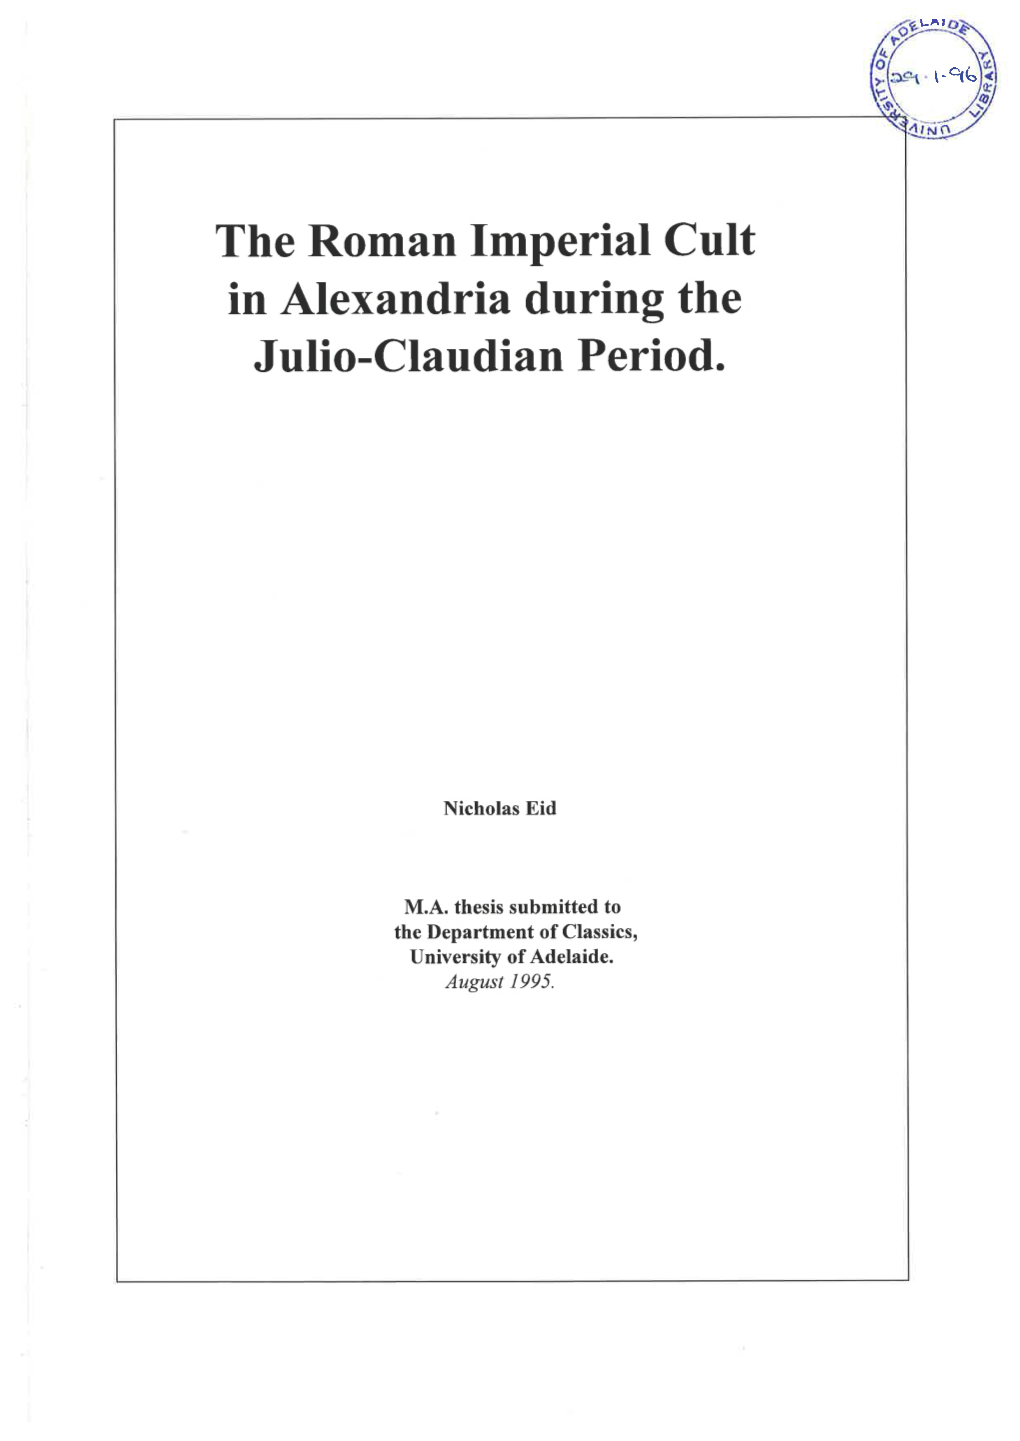 The Roman Imperial Cult in Alexandria During the Julio-Claudian Period